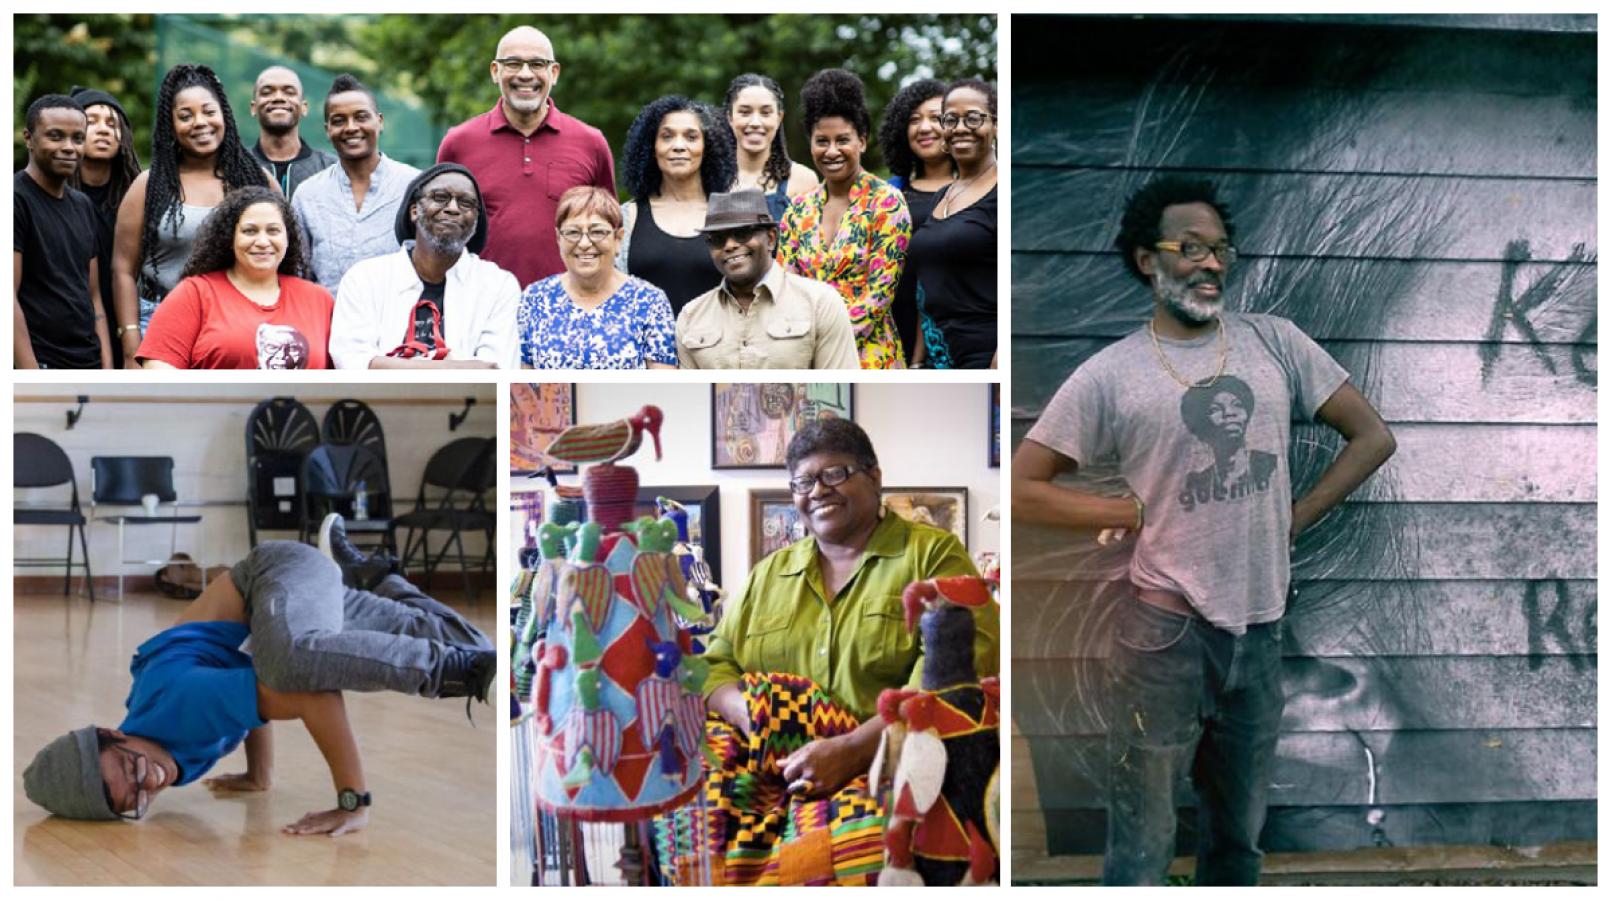 a collage of images including a group picture of Cave Canem fellows, Jetsonorama posing with his wheat paste Carolyn Mazloomi showing off her quilts, and a young child doing a headspin